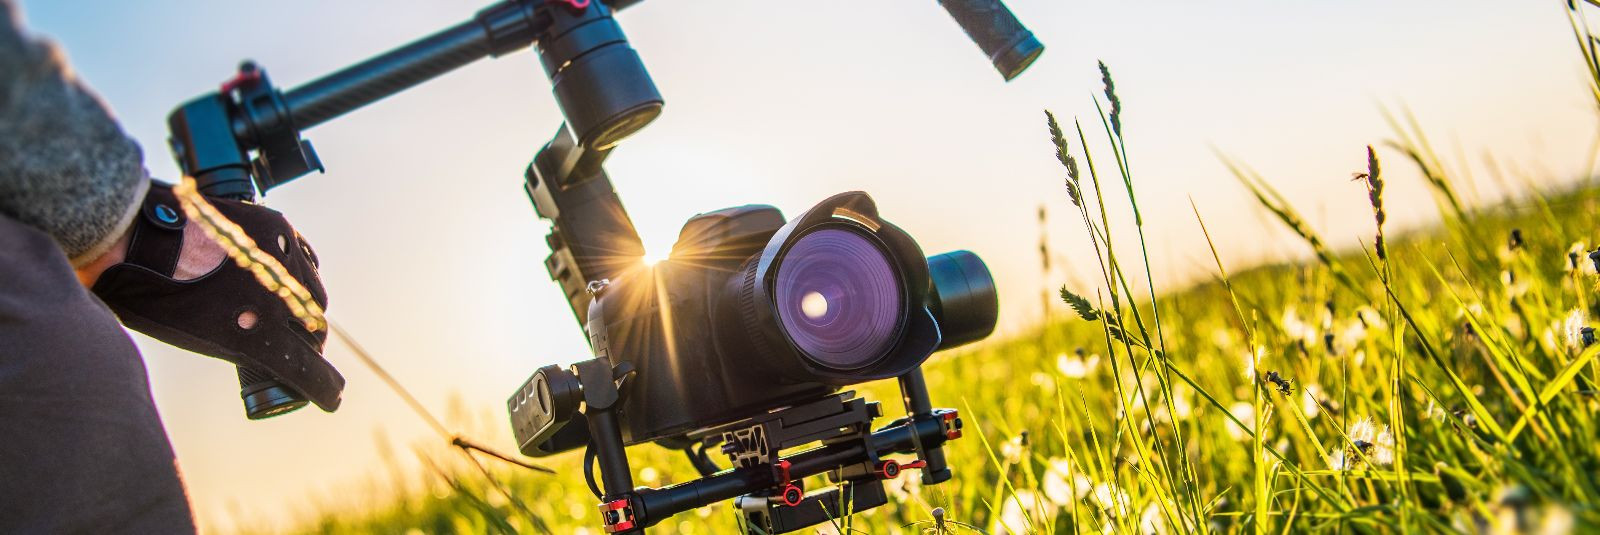 Videography has evolved into an art form that captures the essence of moments, tells compelling stories, and transports audiences to distant worlds. Whether you